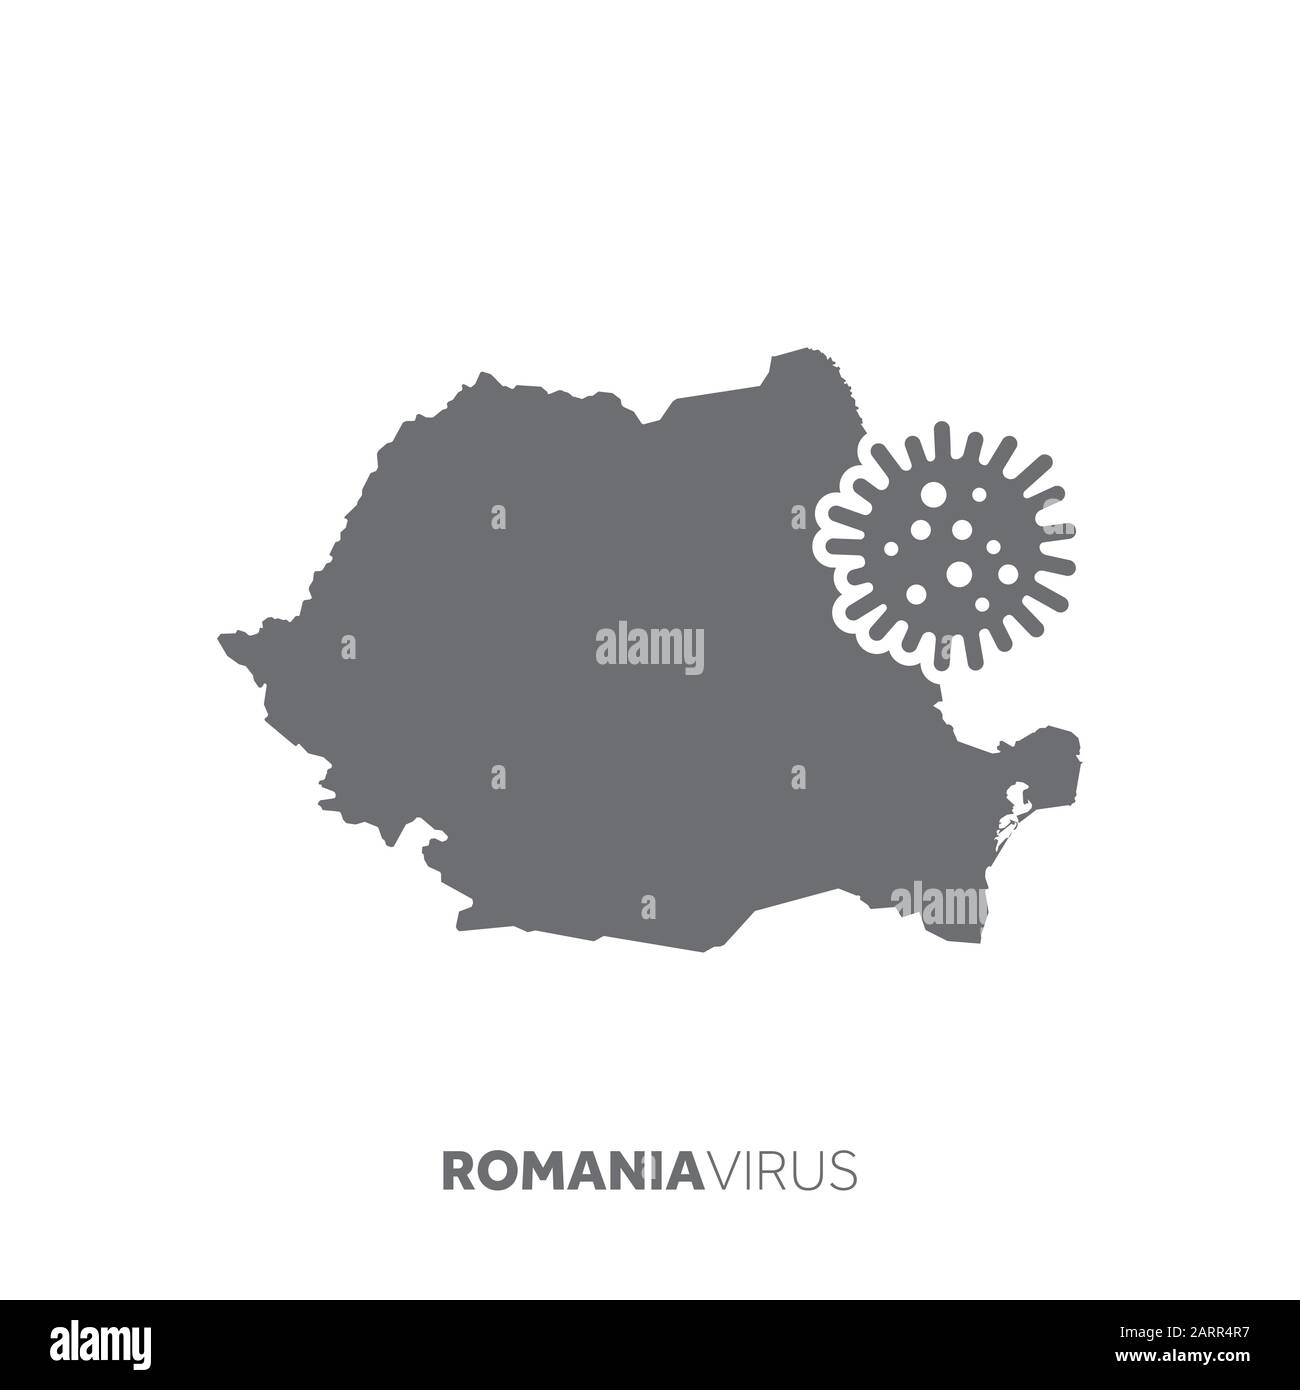 Romania map with a virus microbe. Illness and disease outbreak Stock Vector